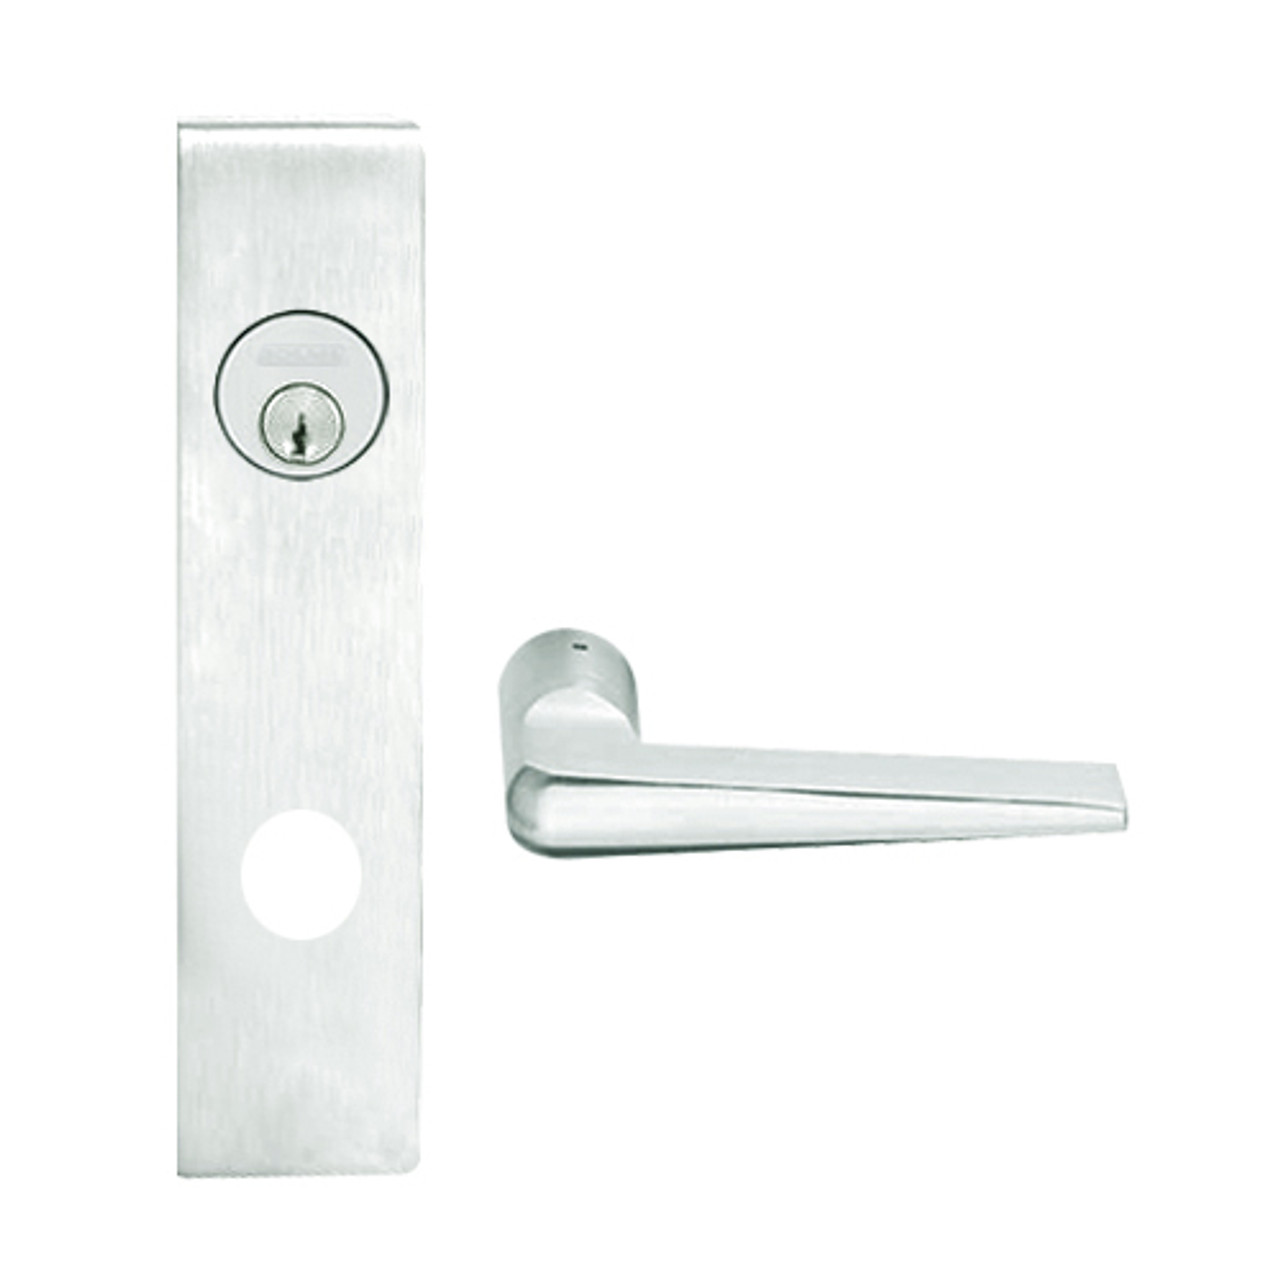 L9026L-05L-619 Schlage L Series Less Cylinder Exit Lock with Cylinder Commercial Mortise Lock with 05 Cast Lever Design in Satin Nickel